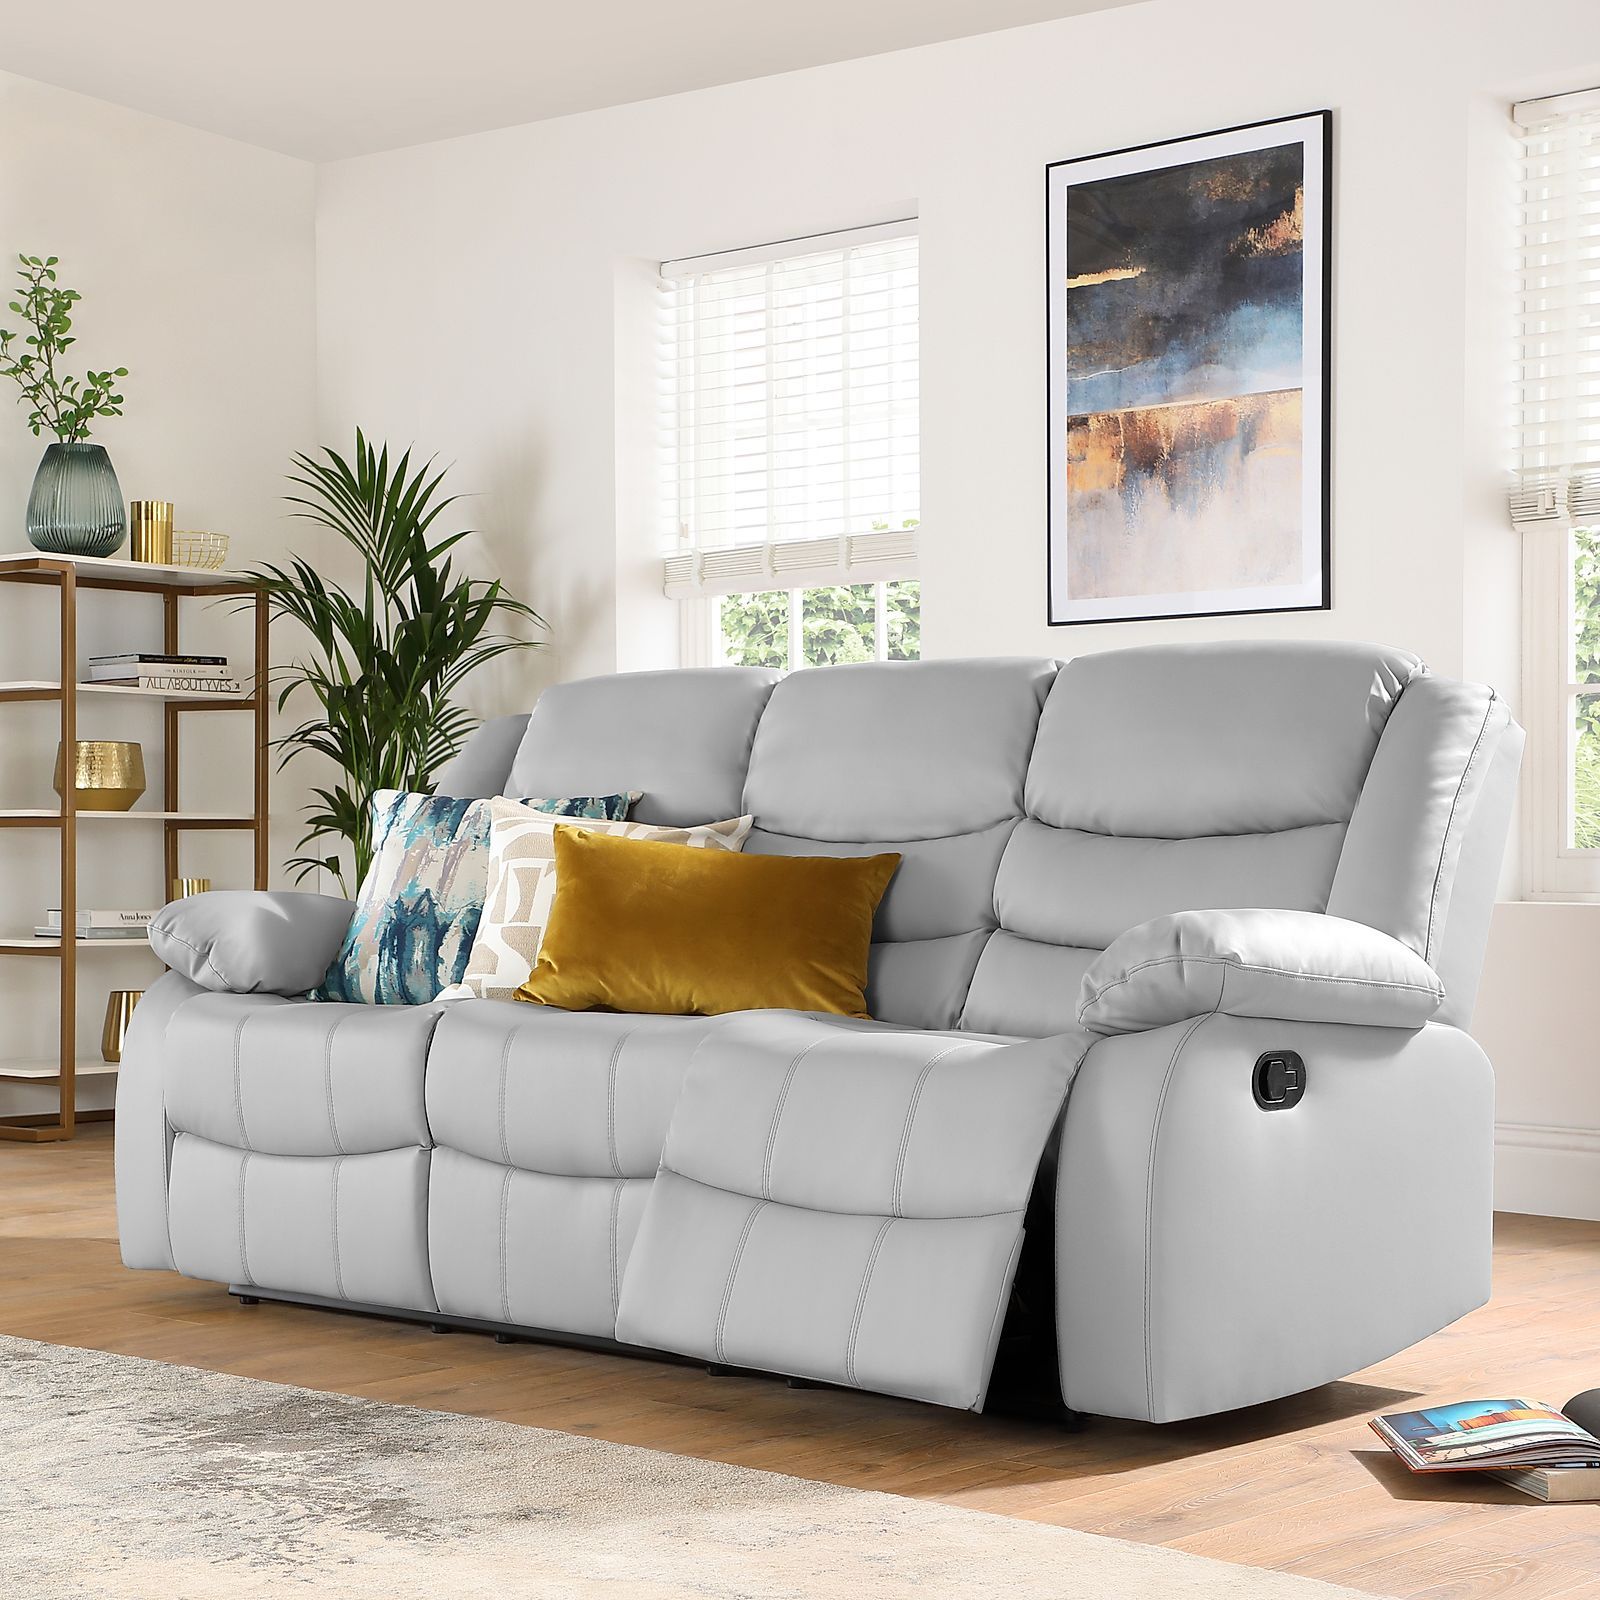 Sorrento Light Grey Leather 3 Seater Recliner Sofa | Furniture Choice For Sofas In Light Gray (Gallery 12 of 22)